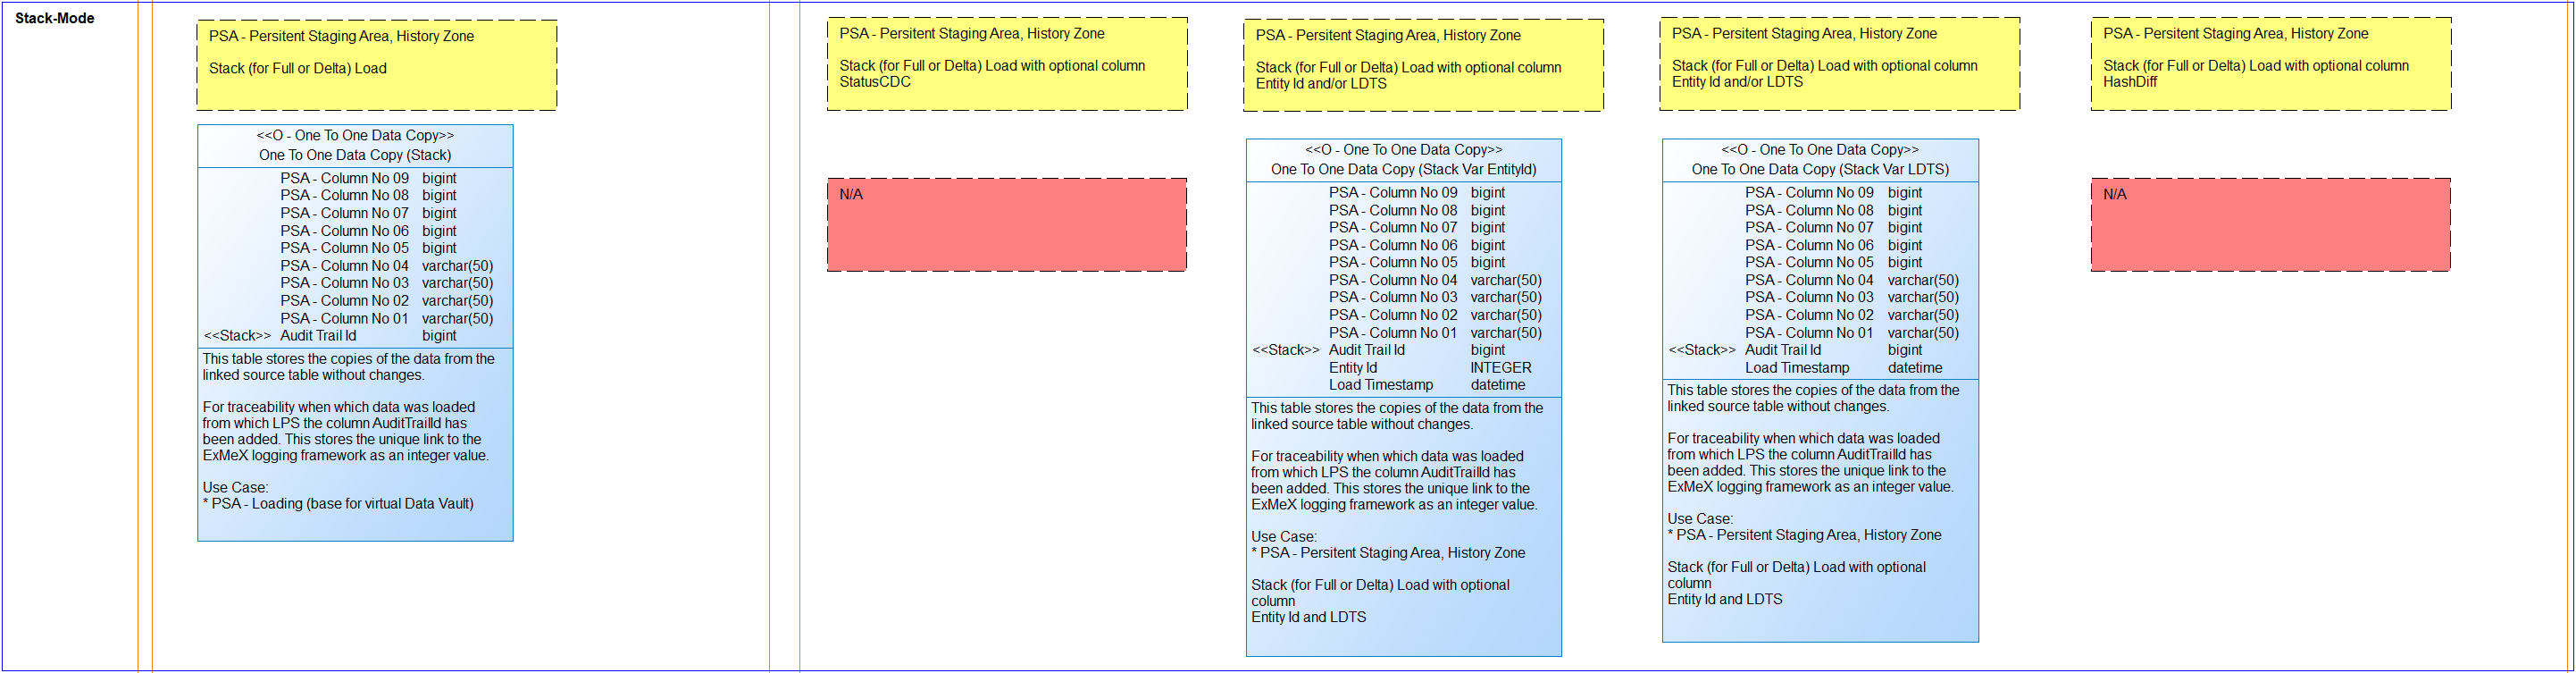 One To One Data Copy Table - Stack-Mode and variations.